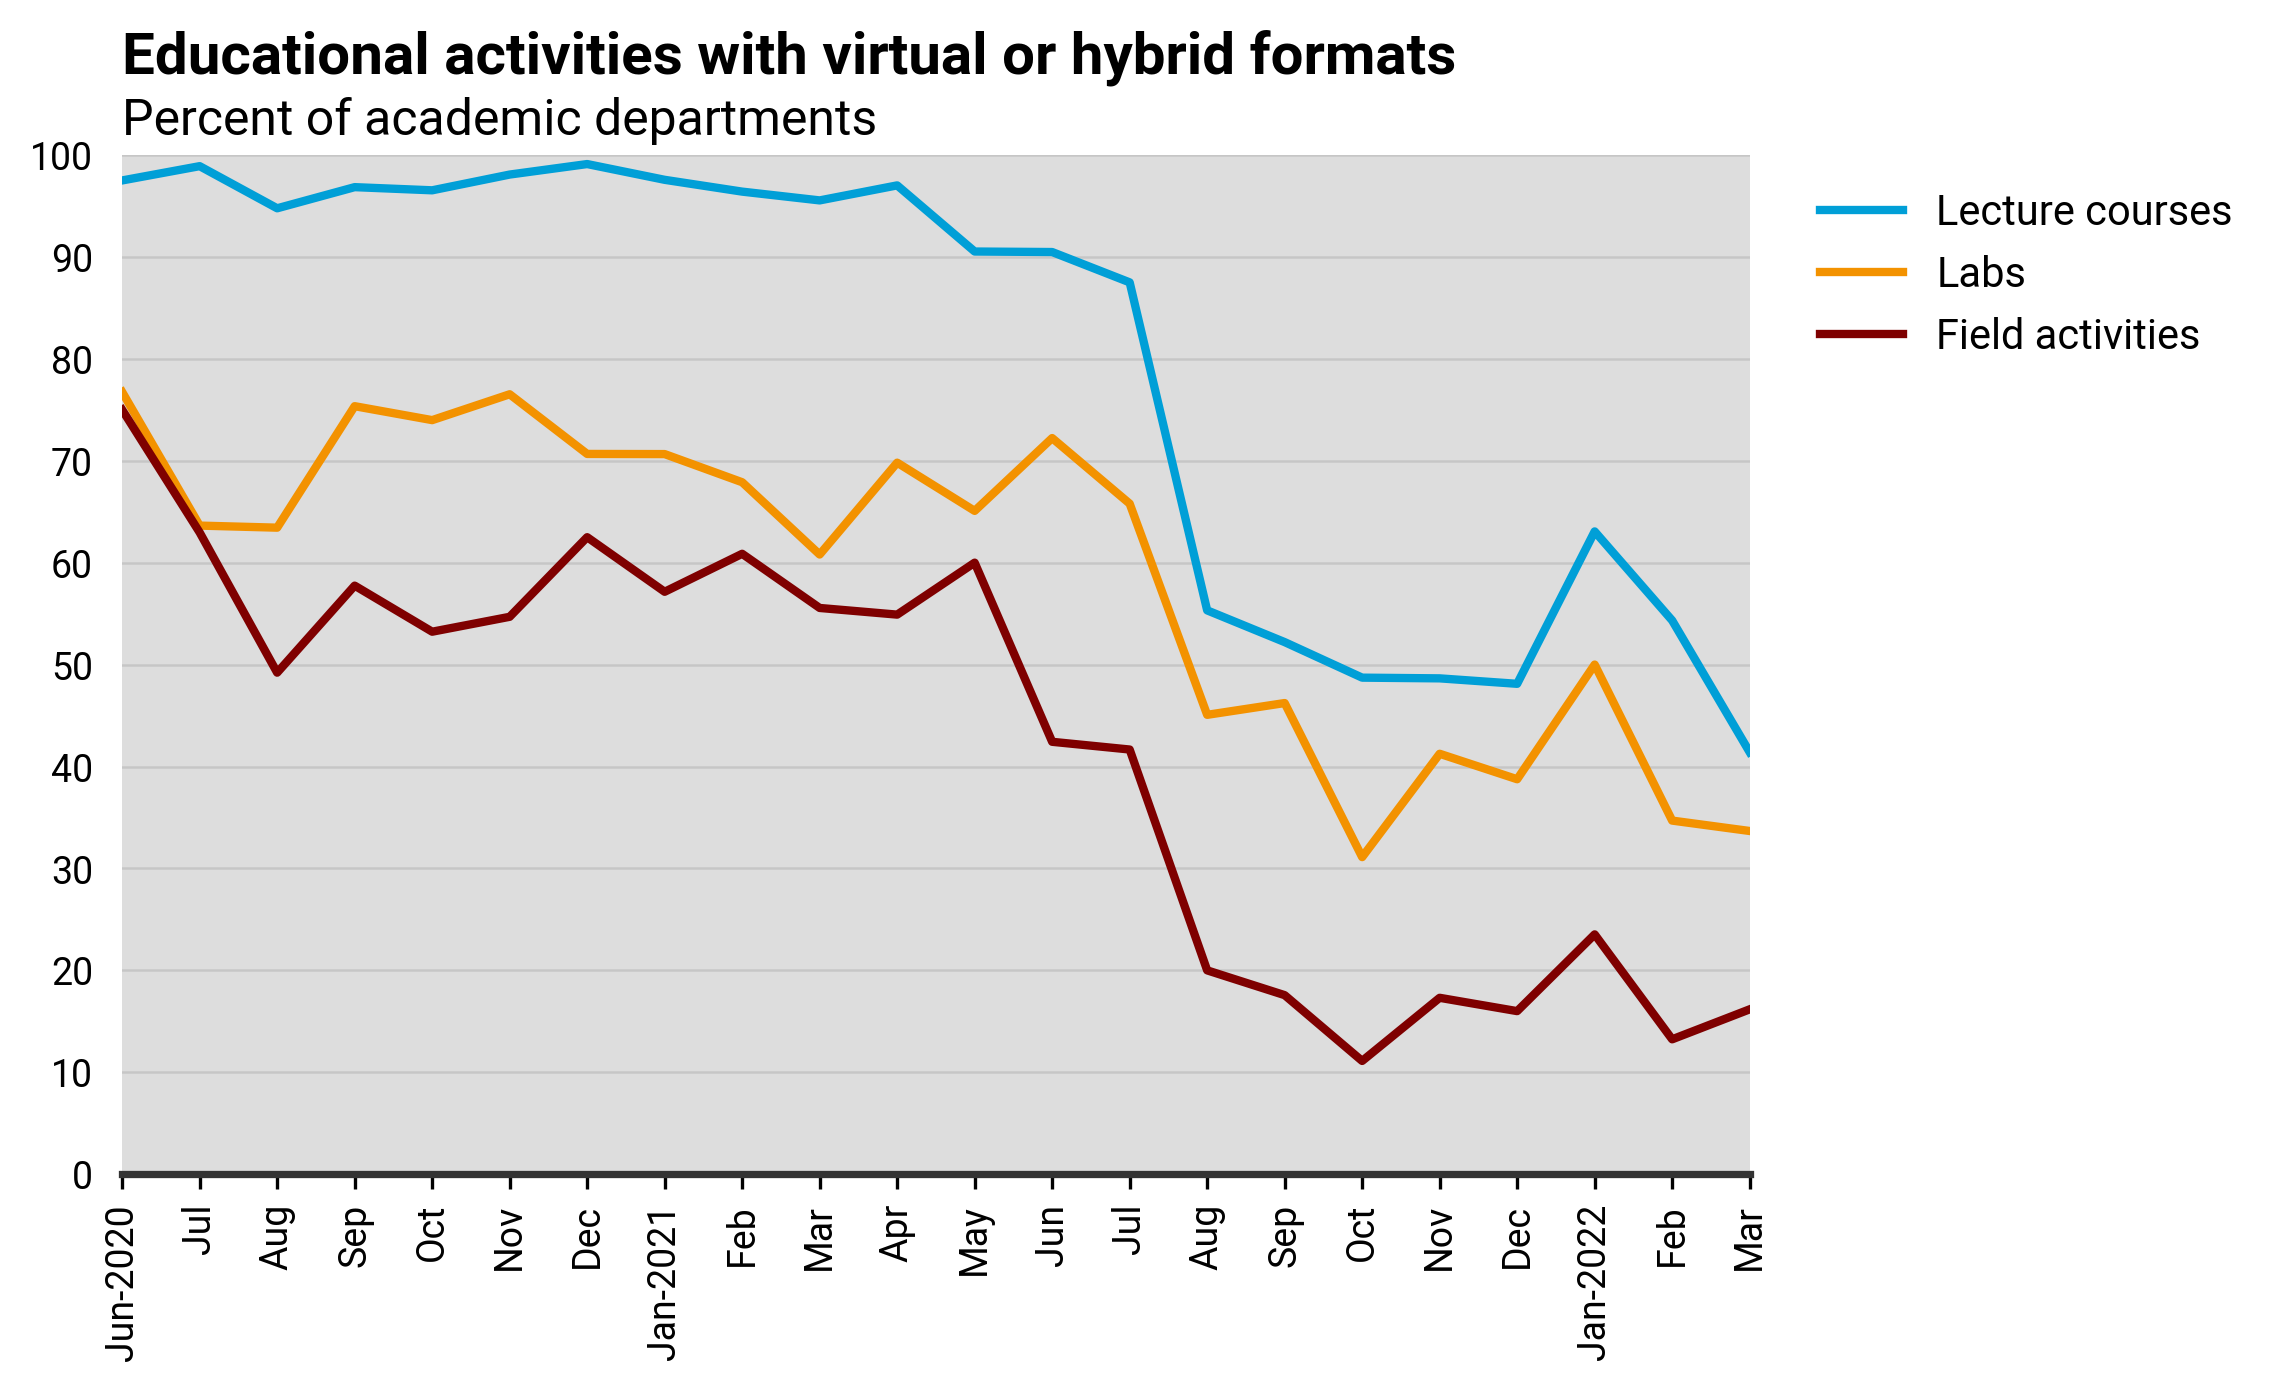 DB_2022-004 chart 07: Educational activities with virtual or hybrid formats (Credit: AGI; data from AGI's Geoscience COVID-19 Survey)